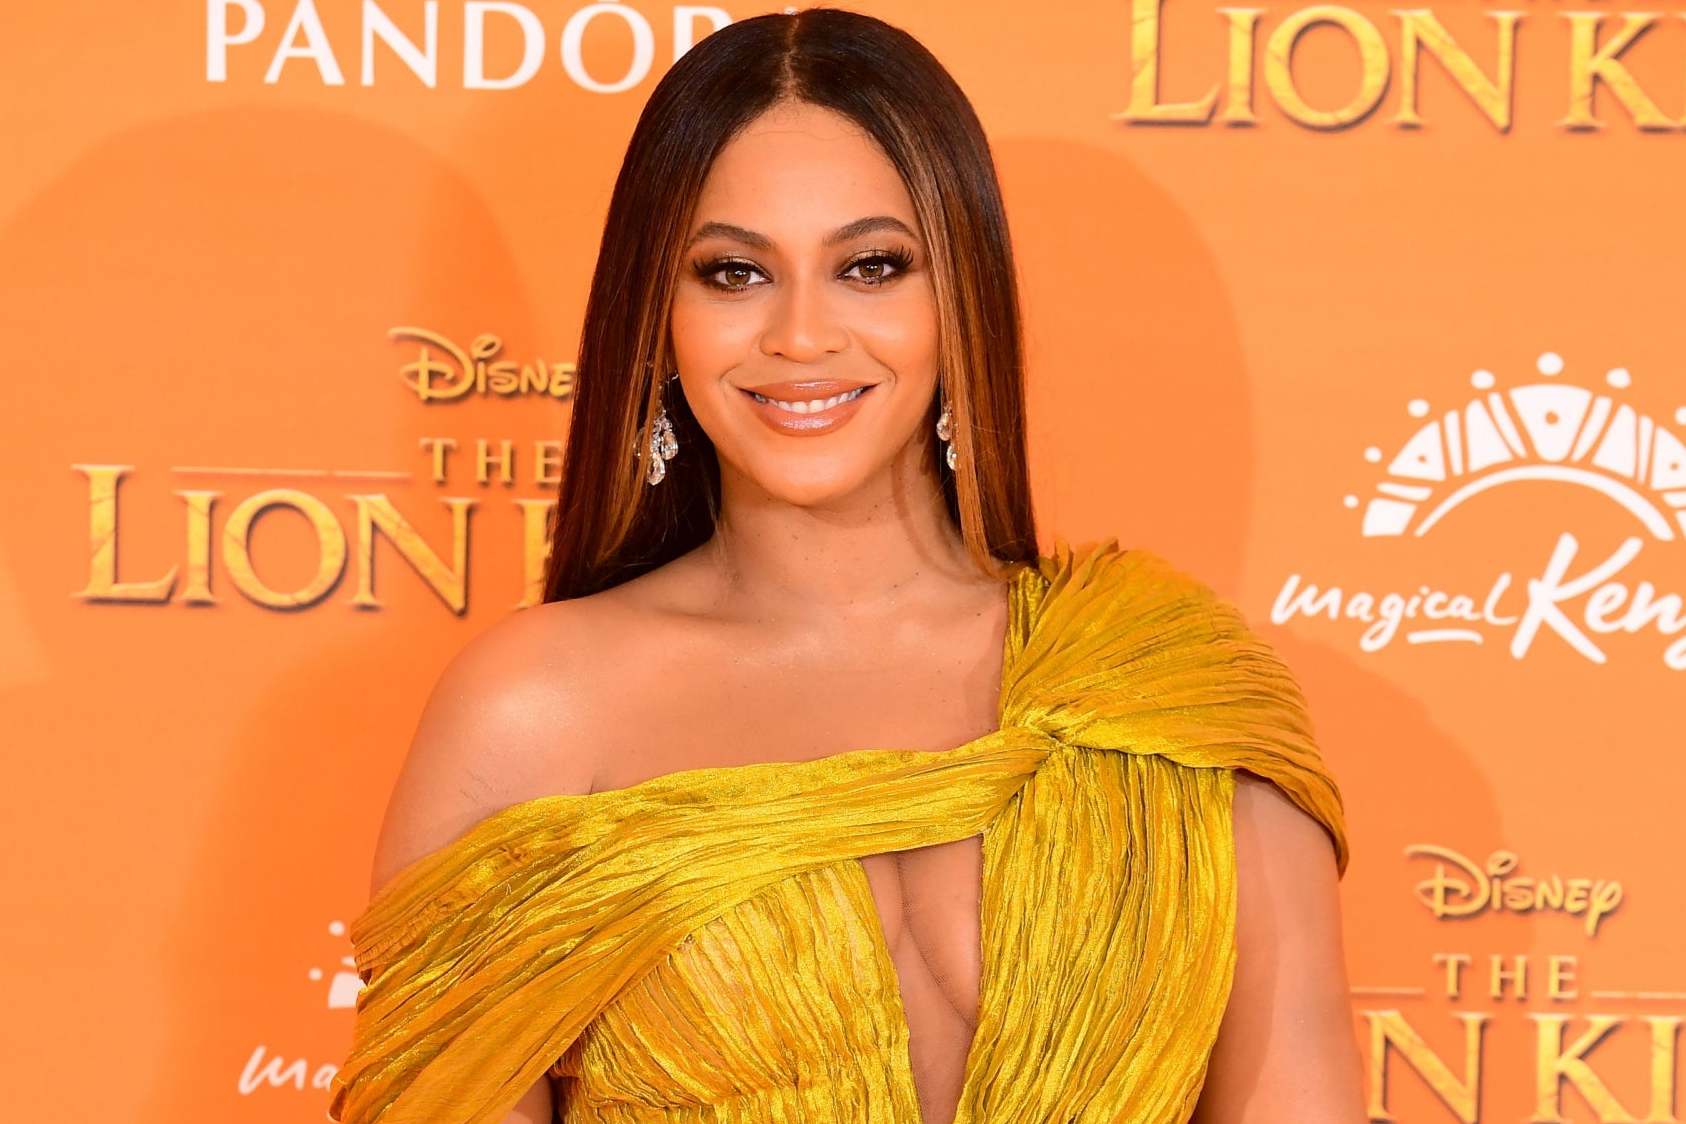 Beyoncé brands new Lion King album The Gift 'a love letter to Africa